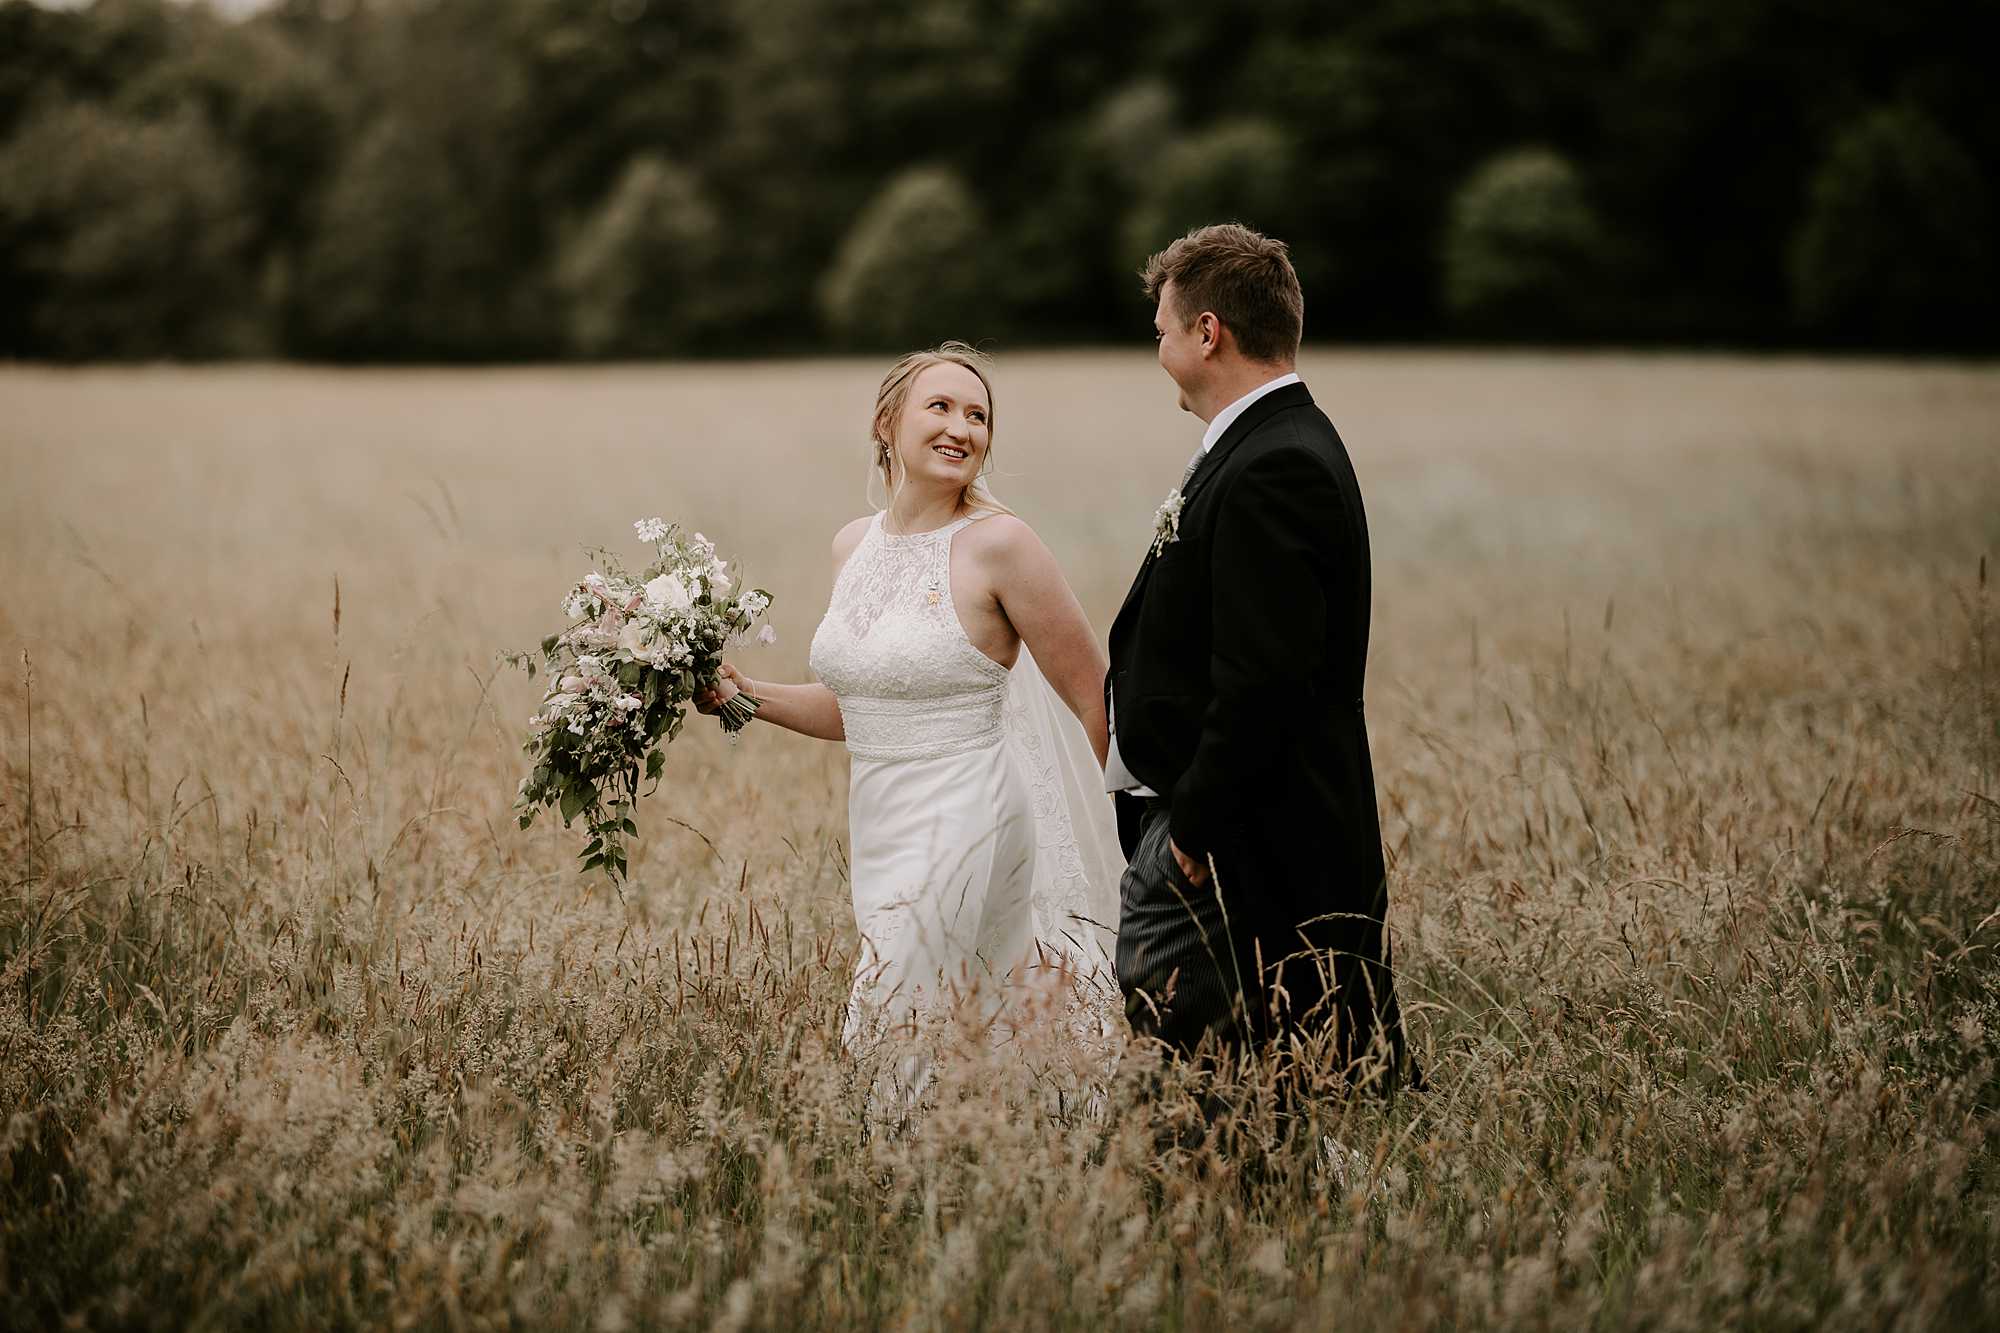 Holywell Estate wedding with Luxury and Chris